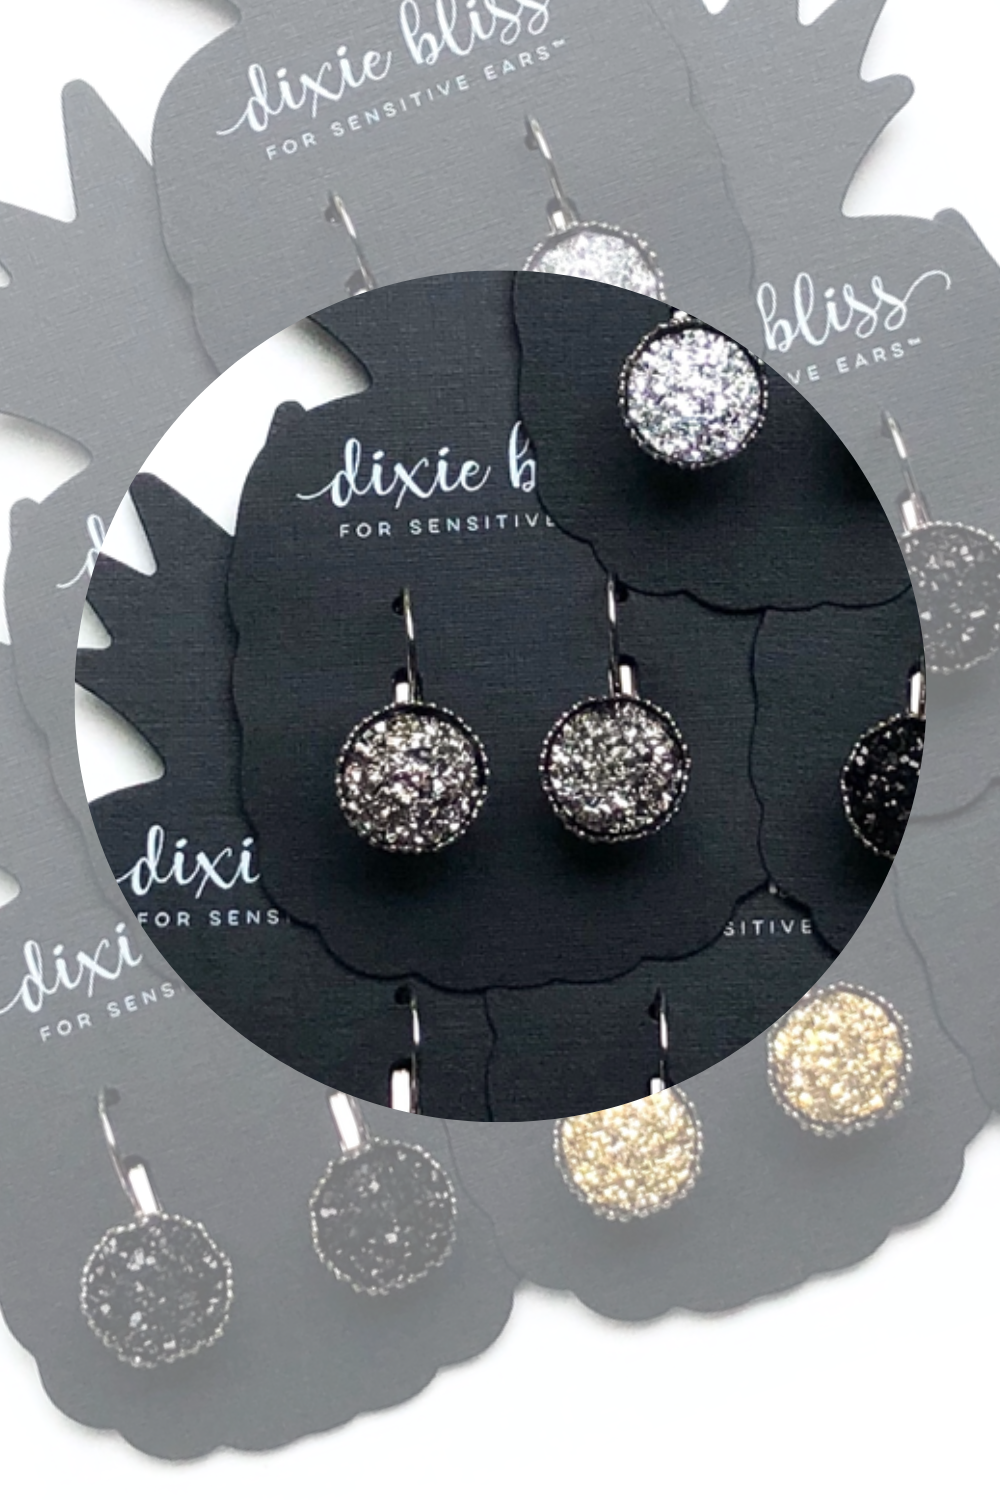 Dixie Bliss Earrings: Perfect Lever Backs In Gunmetal, Silver, Gold, Black. All are Hypoallergenic made in the USA woman-owned company druzy shiny diamond-like sparkle and shine safe & made for sensitive ears